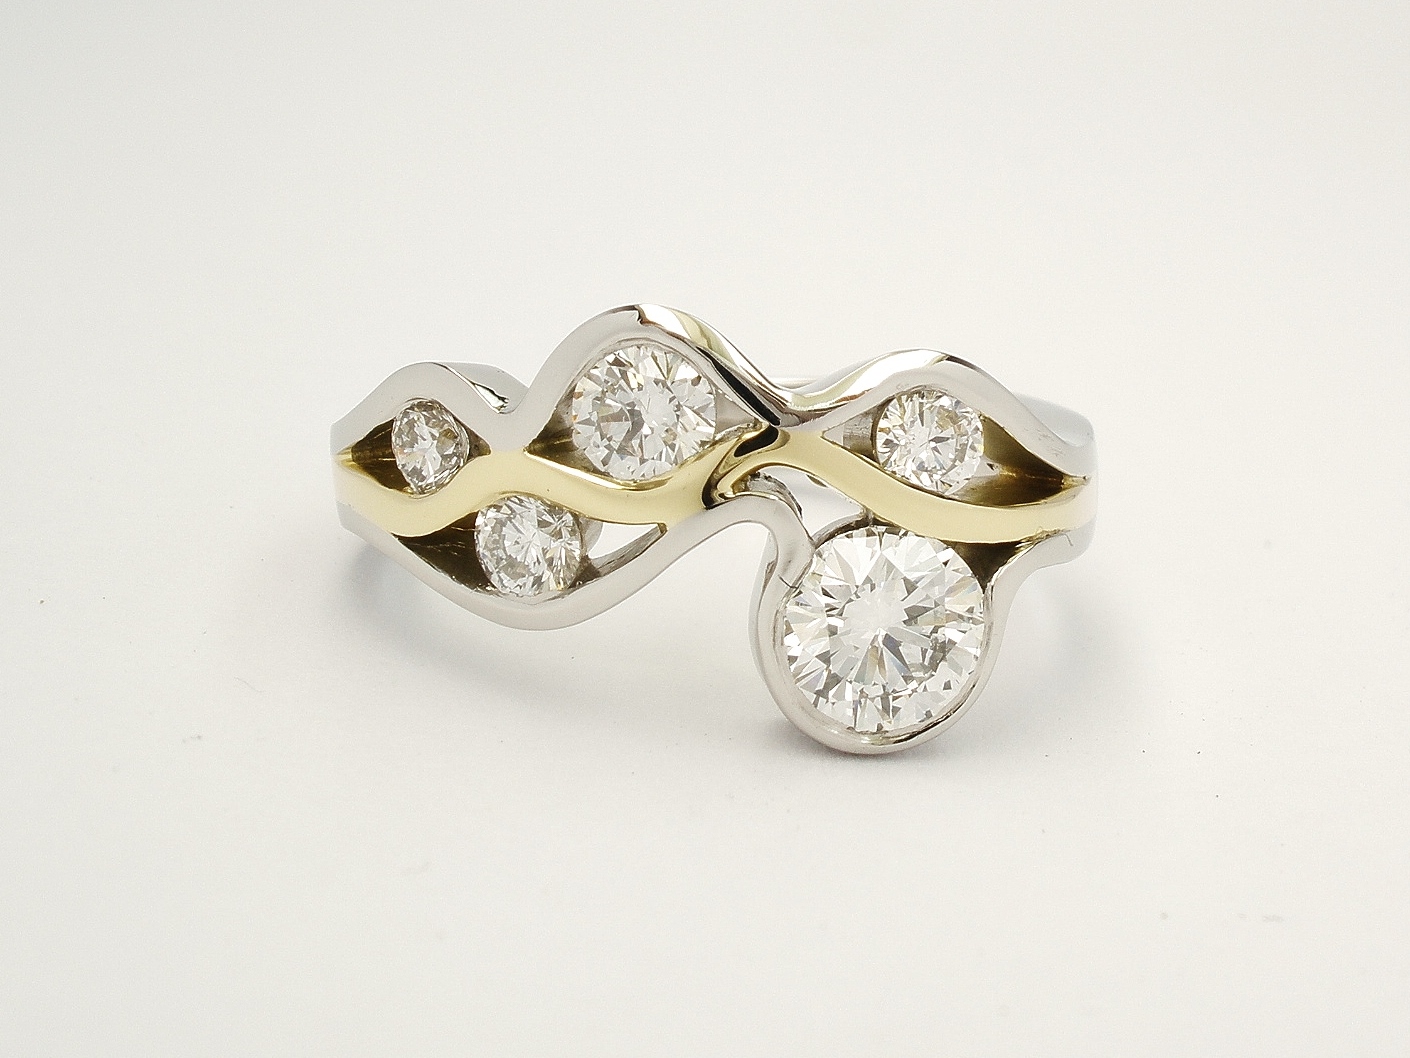 Round brilliant cut diamond 'Wave' ring mounted in Platinum and 18ct. yellow gold.